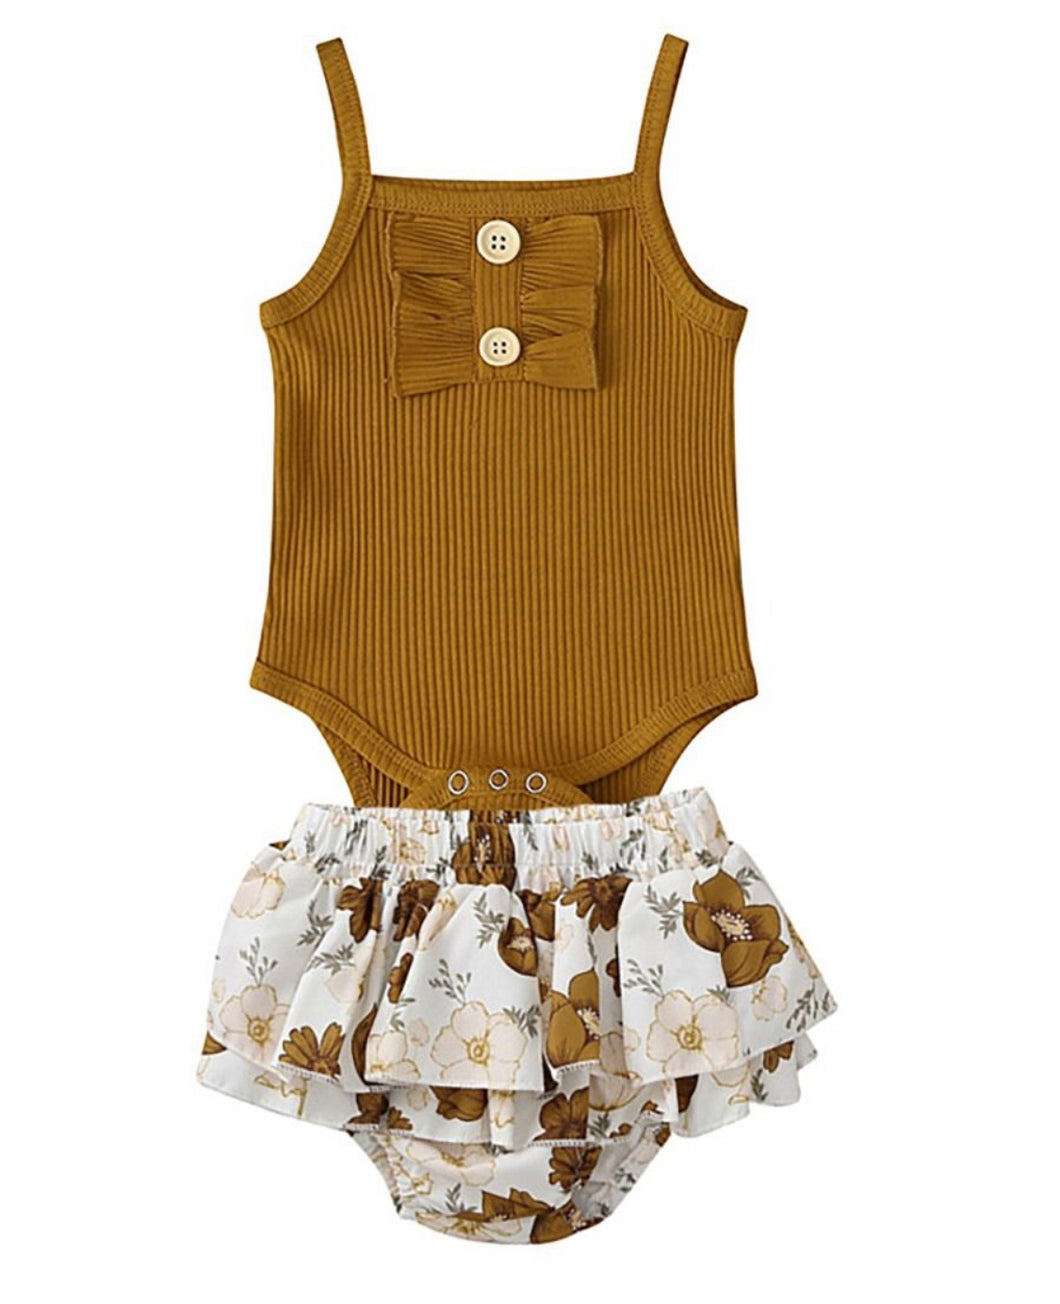 Girls Two piece set - white and brown